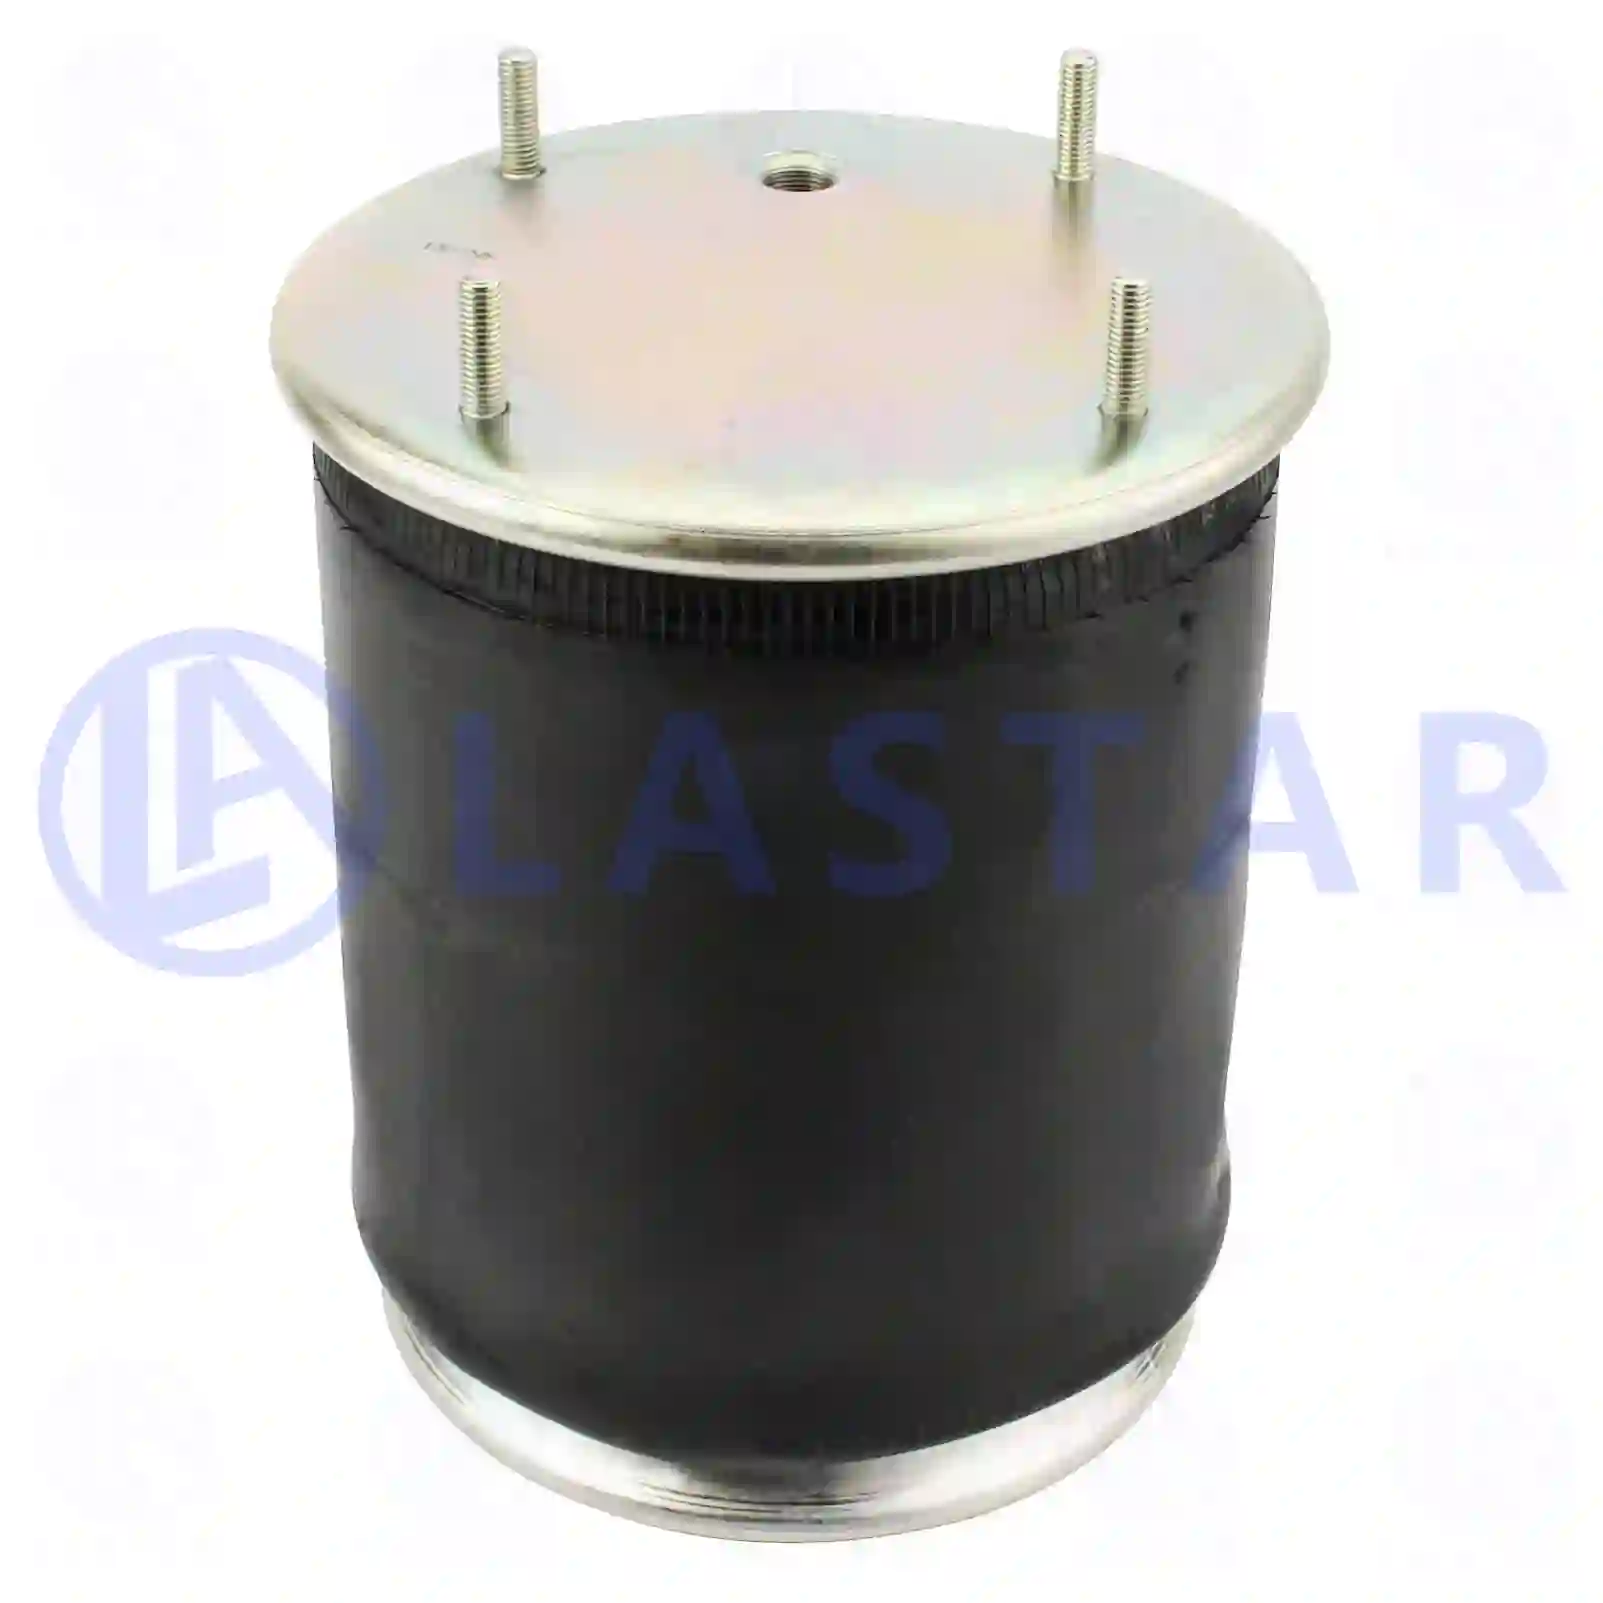 Air spring, with steel piston, 77728495, 0274927, 0388491, 1277489, 1322720, 274927, 388491, 003615E, 5000790692, 5010130925, 21215633, 21215663, MLF7026, 2229000300, 2229210300, 2229220300, 2229240300, 2229260300 ||  77728495 Lastar Spare Part | Truck Spare Parts, Auotomotive Spare Parts Air spring, with steel piston, 77728495, 0274927, 0388491, 1277489, 1322720, 274927, 388491, 003615E, 5000790692, 5010130925, 21215633, 21215663, MLF7026, 2229000300, 2229210300, 2229220300, 2229240300, 2229260300 ||  77728495 Lastar Spare Part | Truck Spare Parts, Auotomotive Spare Parts